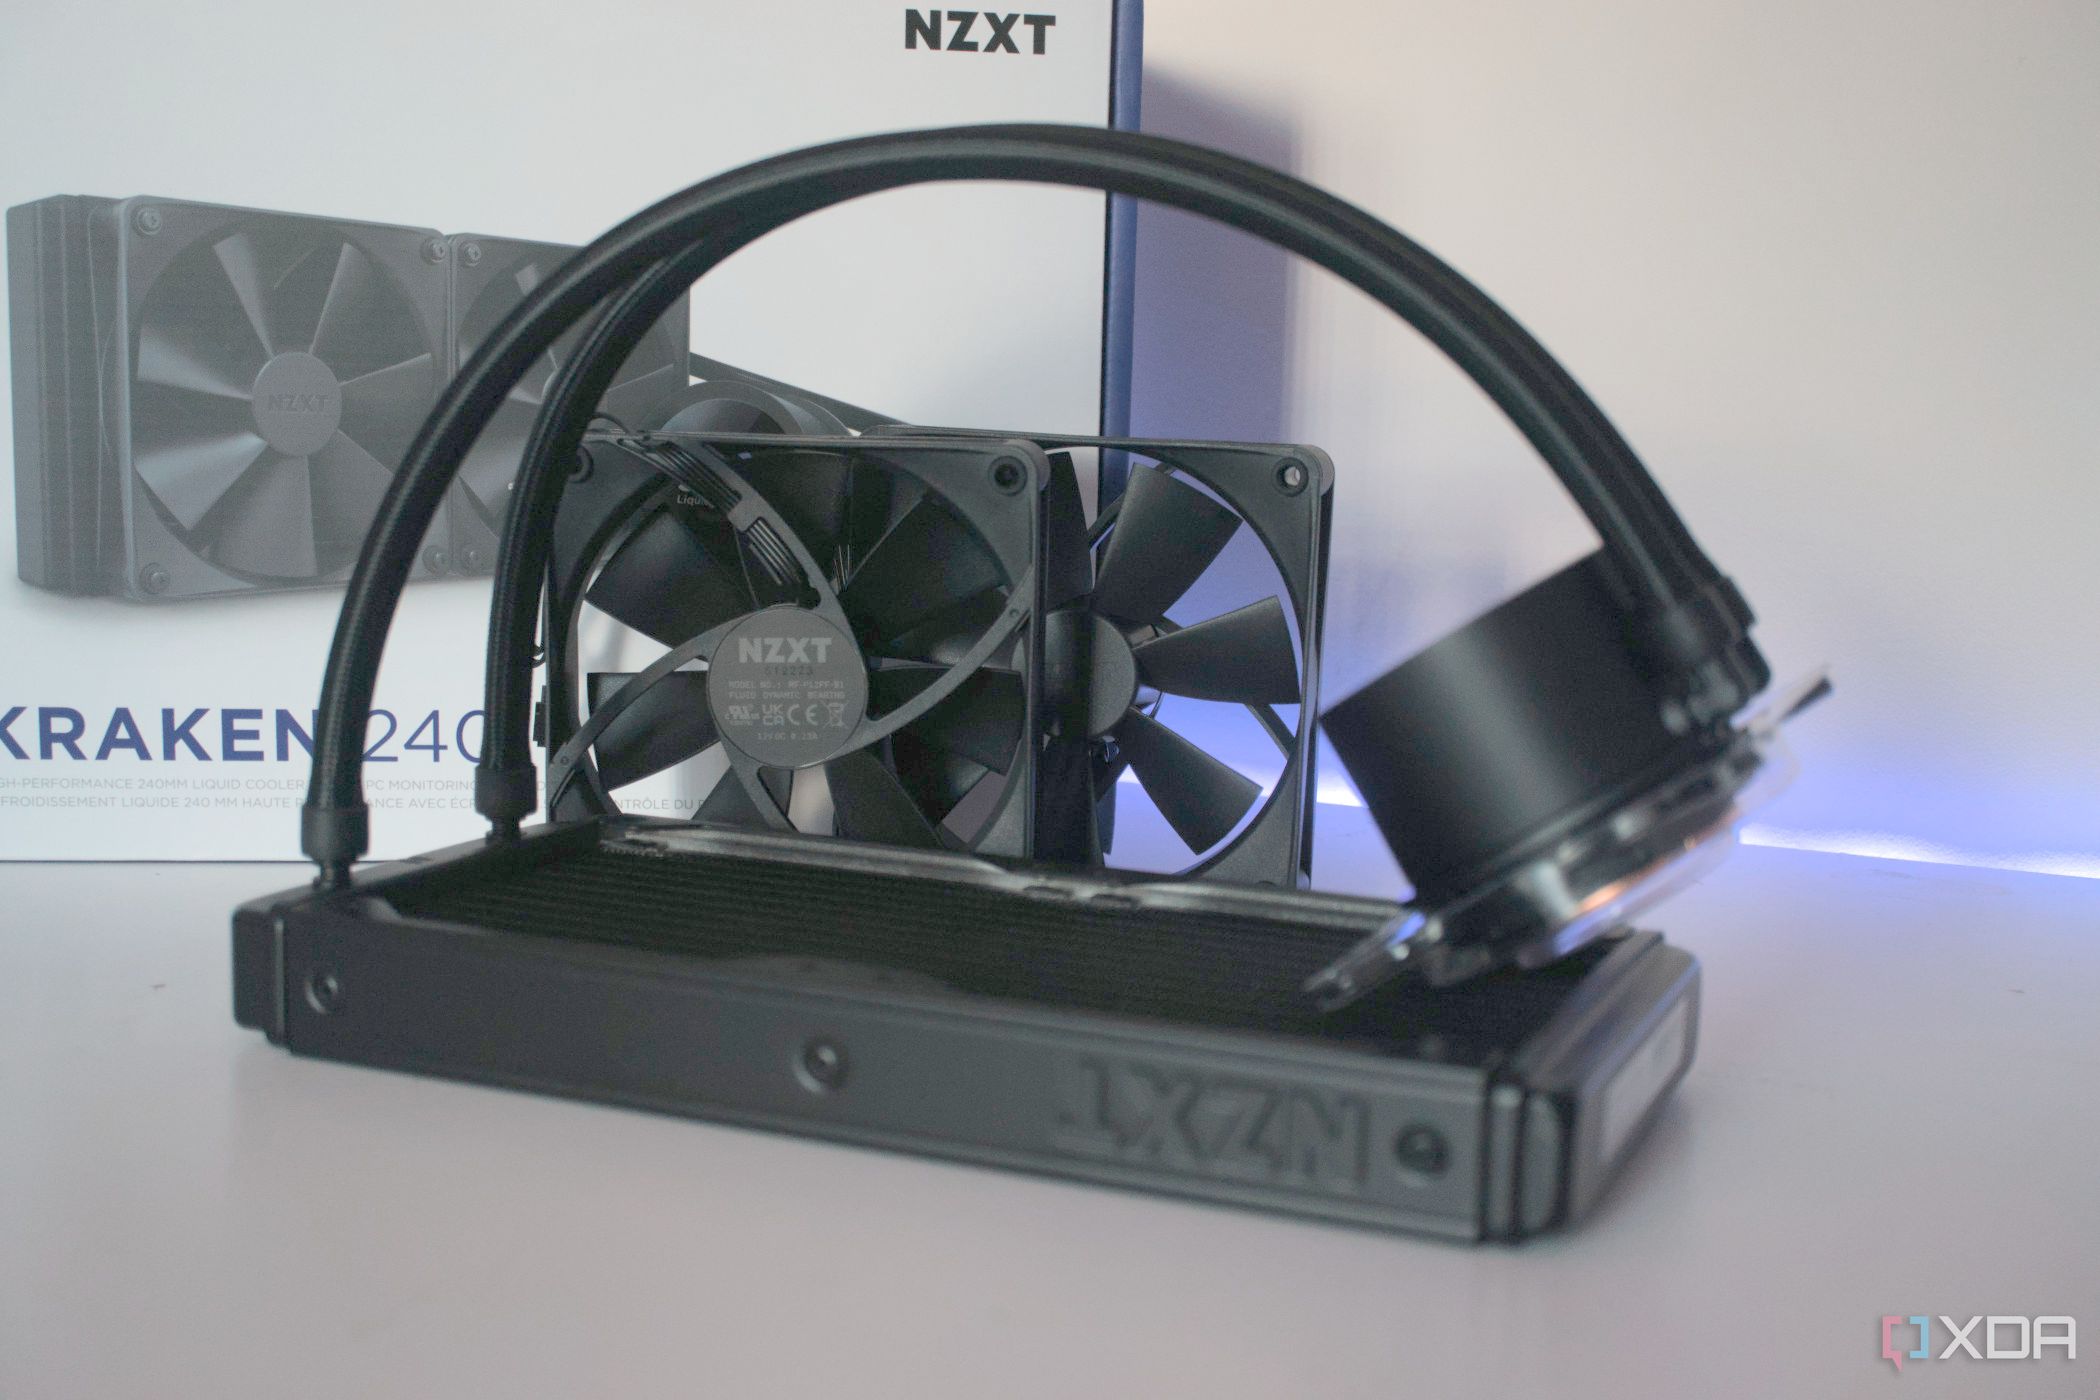 cooling performance Impressive Kraken NZXT at 240 review: reasonable a price